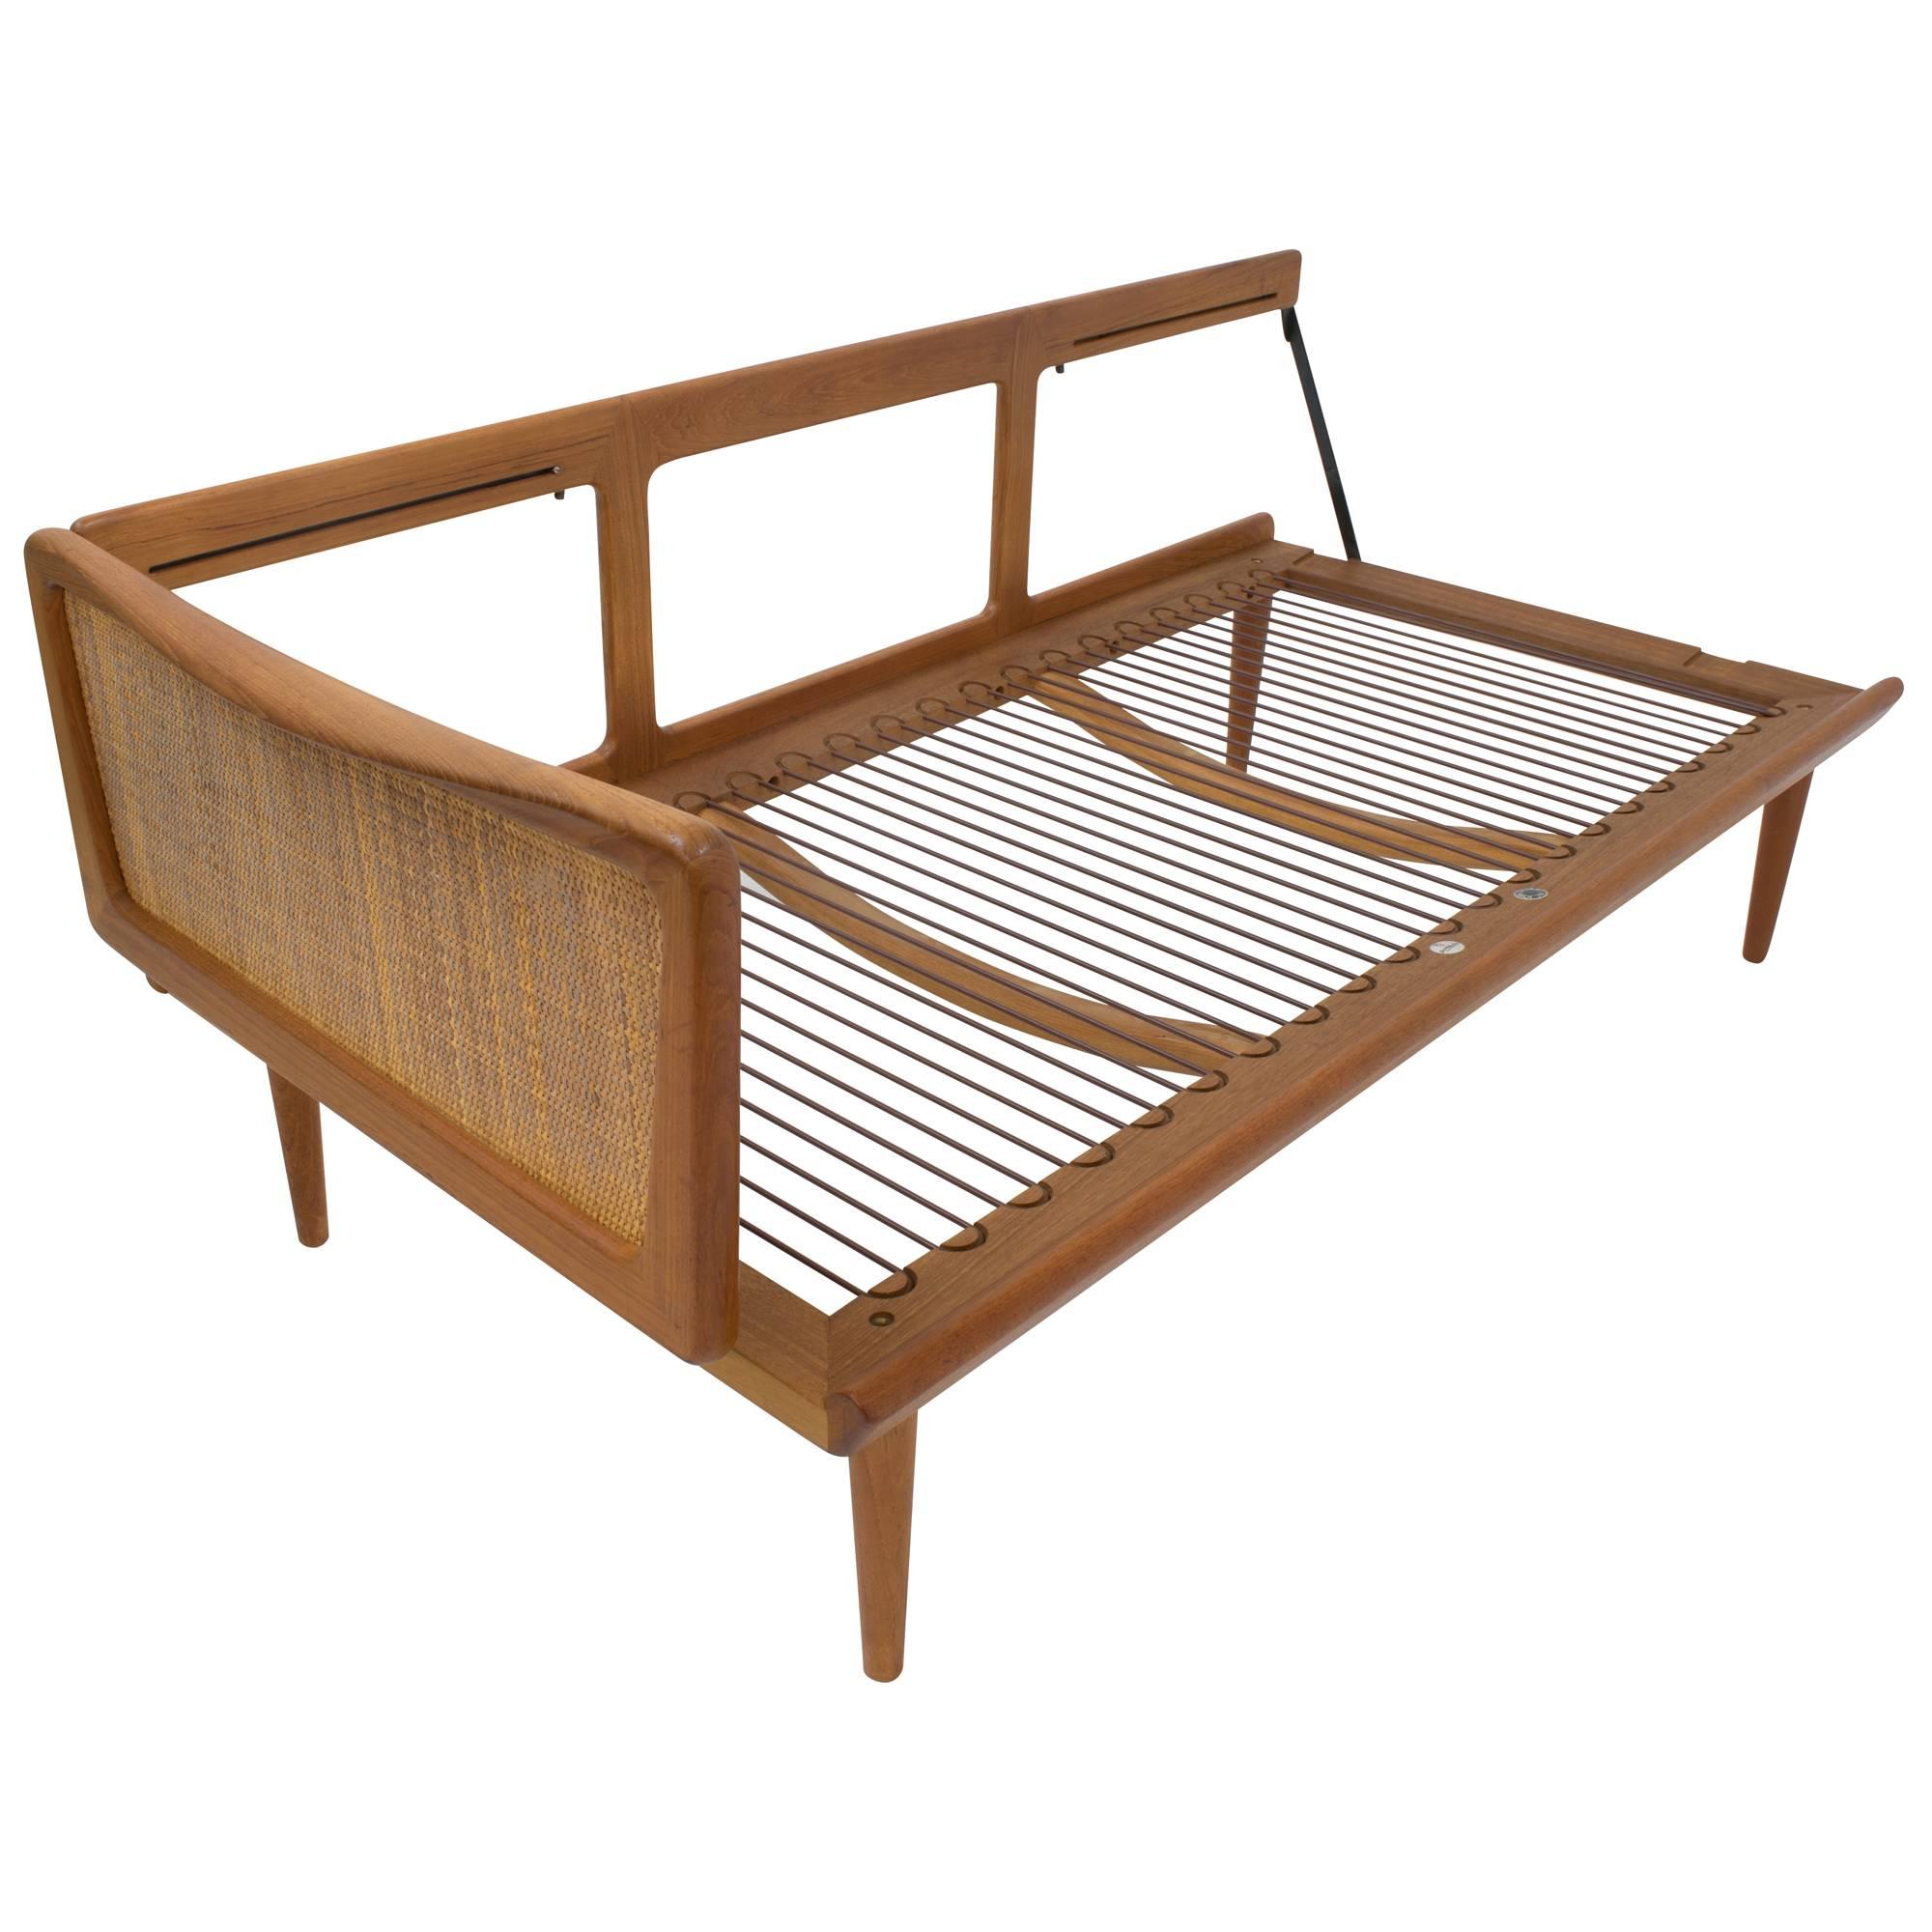 This beautiful and rare daybed was designed by Peter Hvidt and Orla Mølgaard-Nielsen and crafted by France and Son for John Stuart. This model FD451 seating has a caned, fold-down arm that allows the piece to convert from a compact sofa to a daybed.